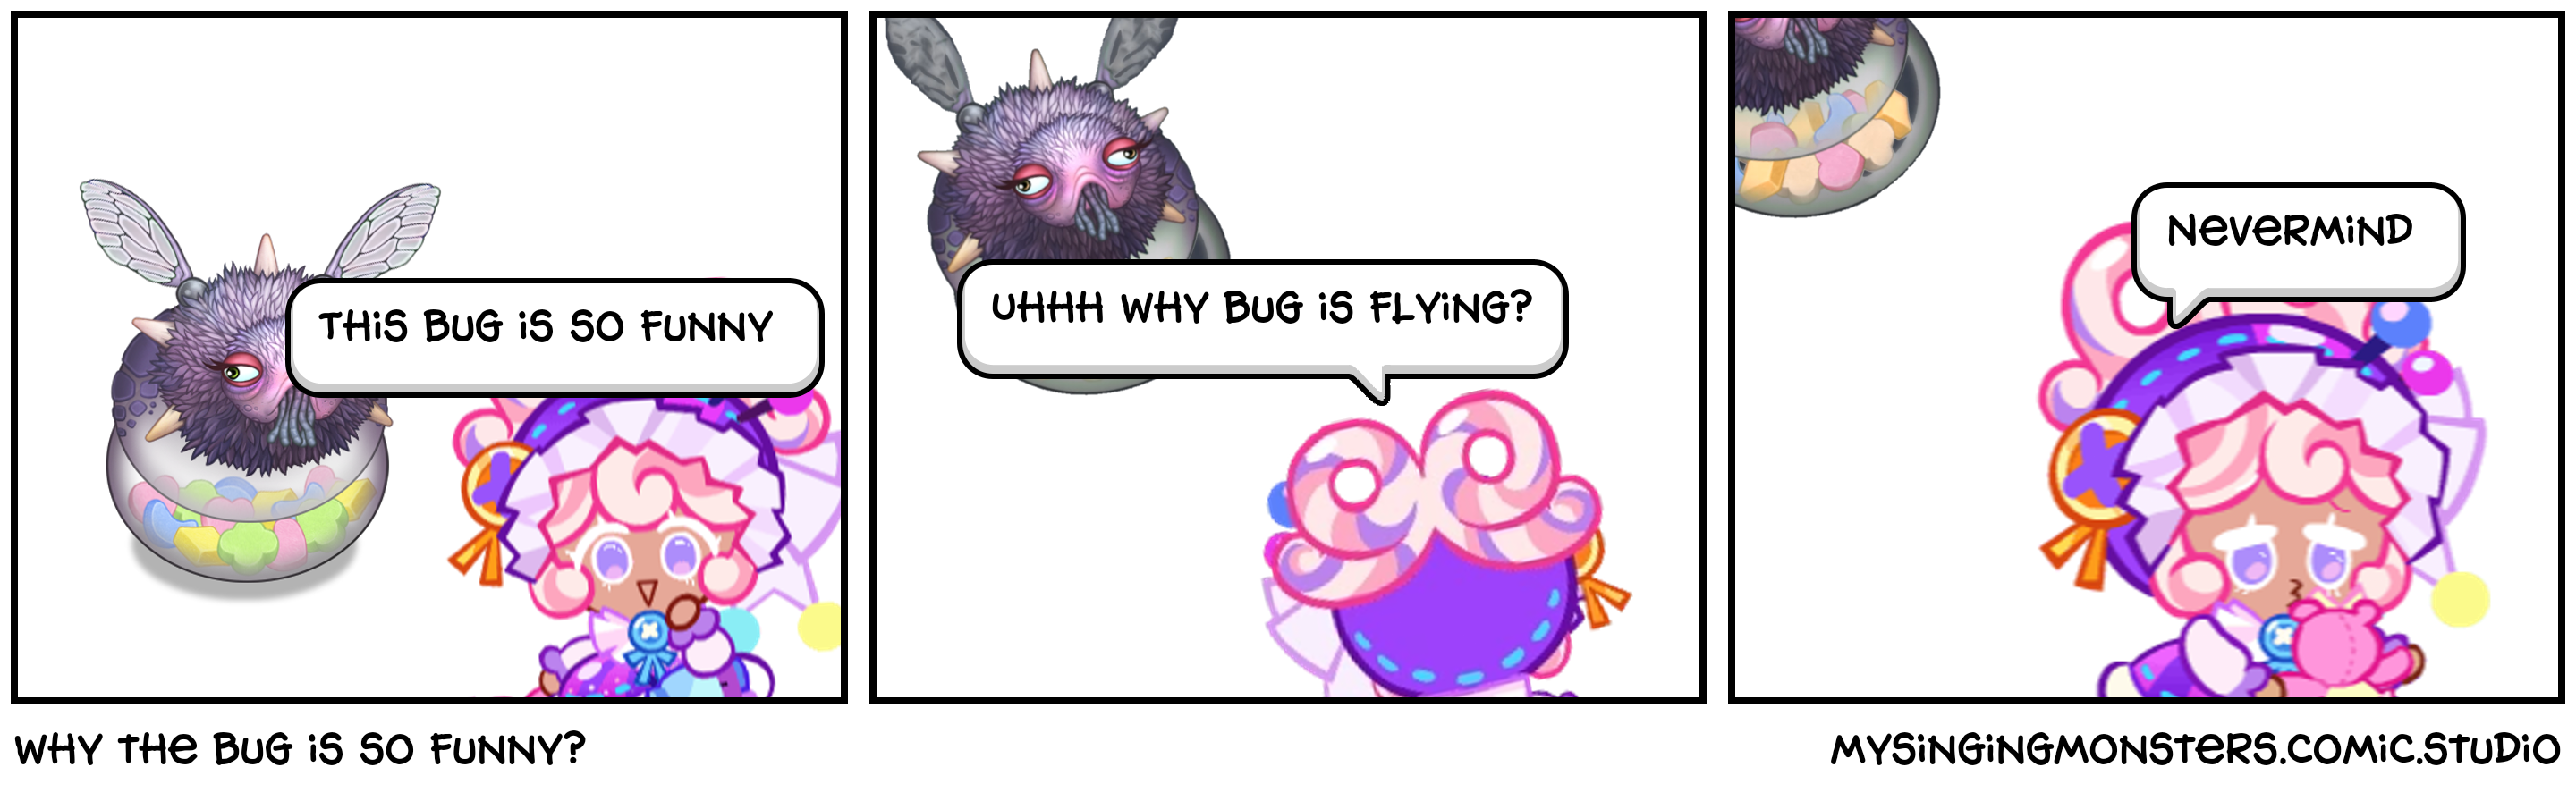 why the bug is so funny?